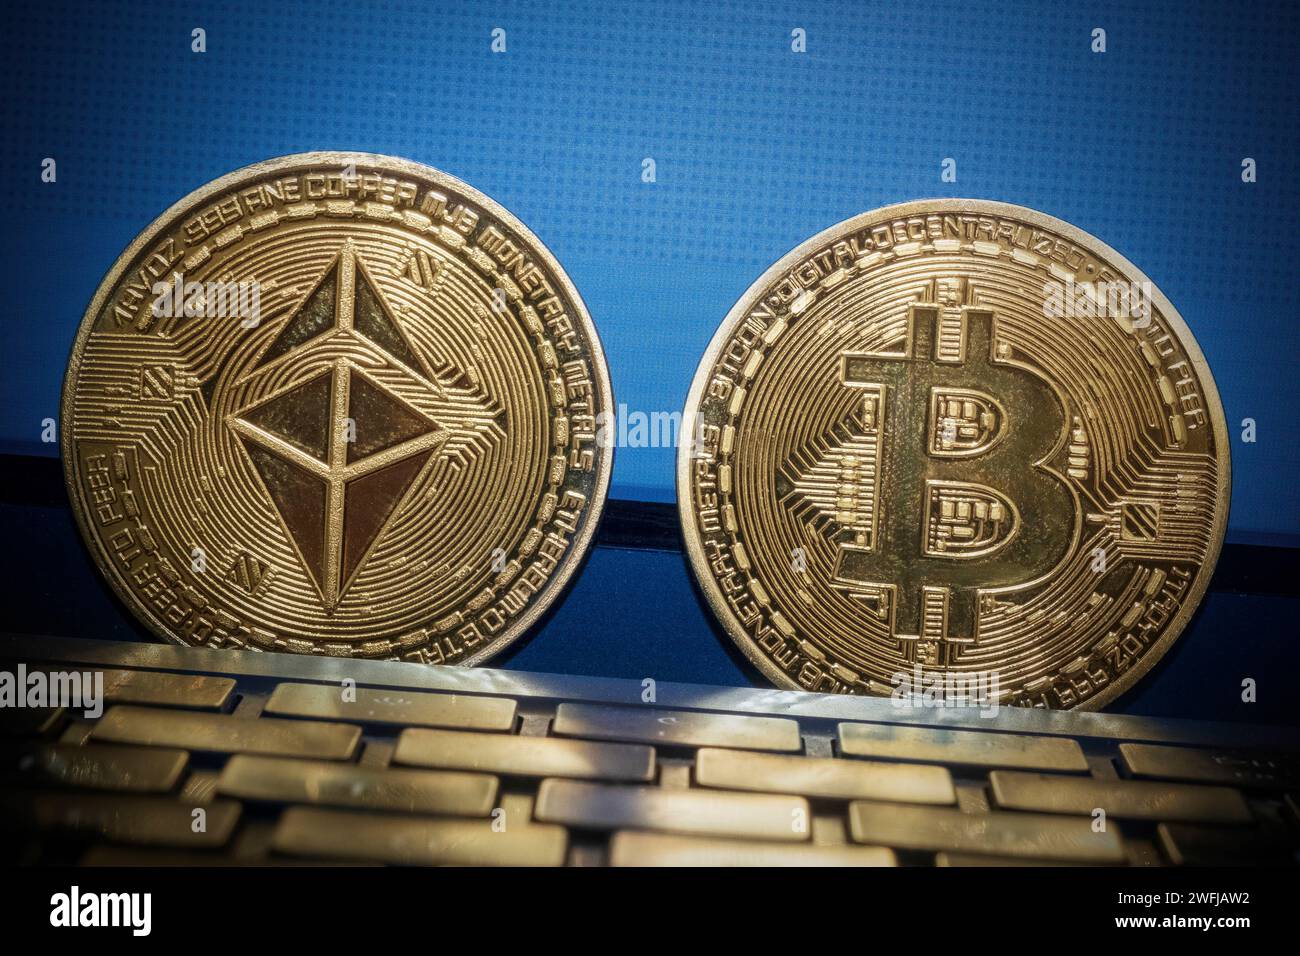 Ethereum and Bitcoin coin on a laptop Stock Photo